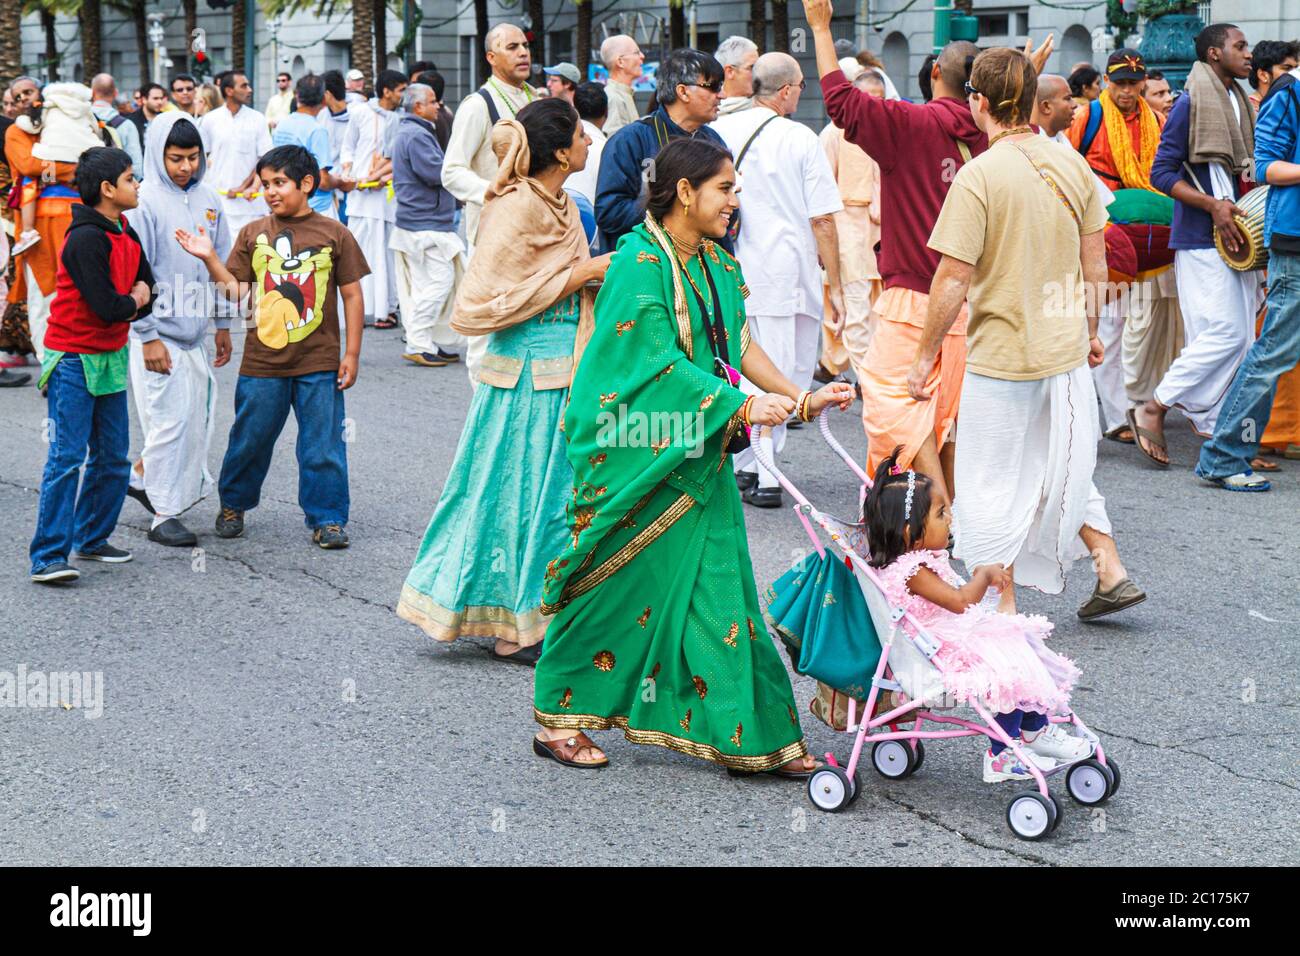 New Orleans Louisiana,downtown,Canal Street,Festival of India,Rath Yatra,Hare Krishna,Hinduism,Eastern religion,festival,parade,procession,Asian Asian Stock Photo